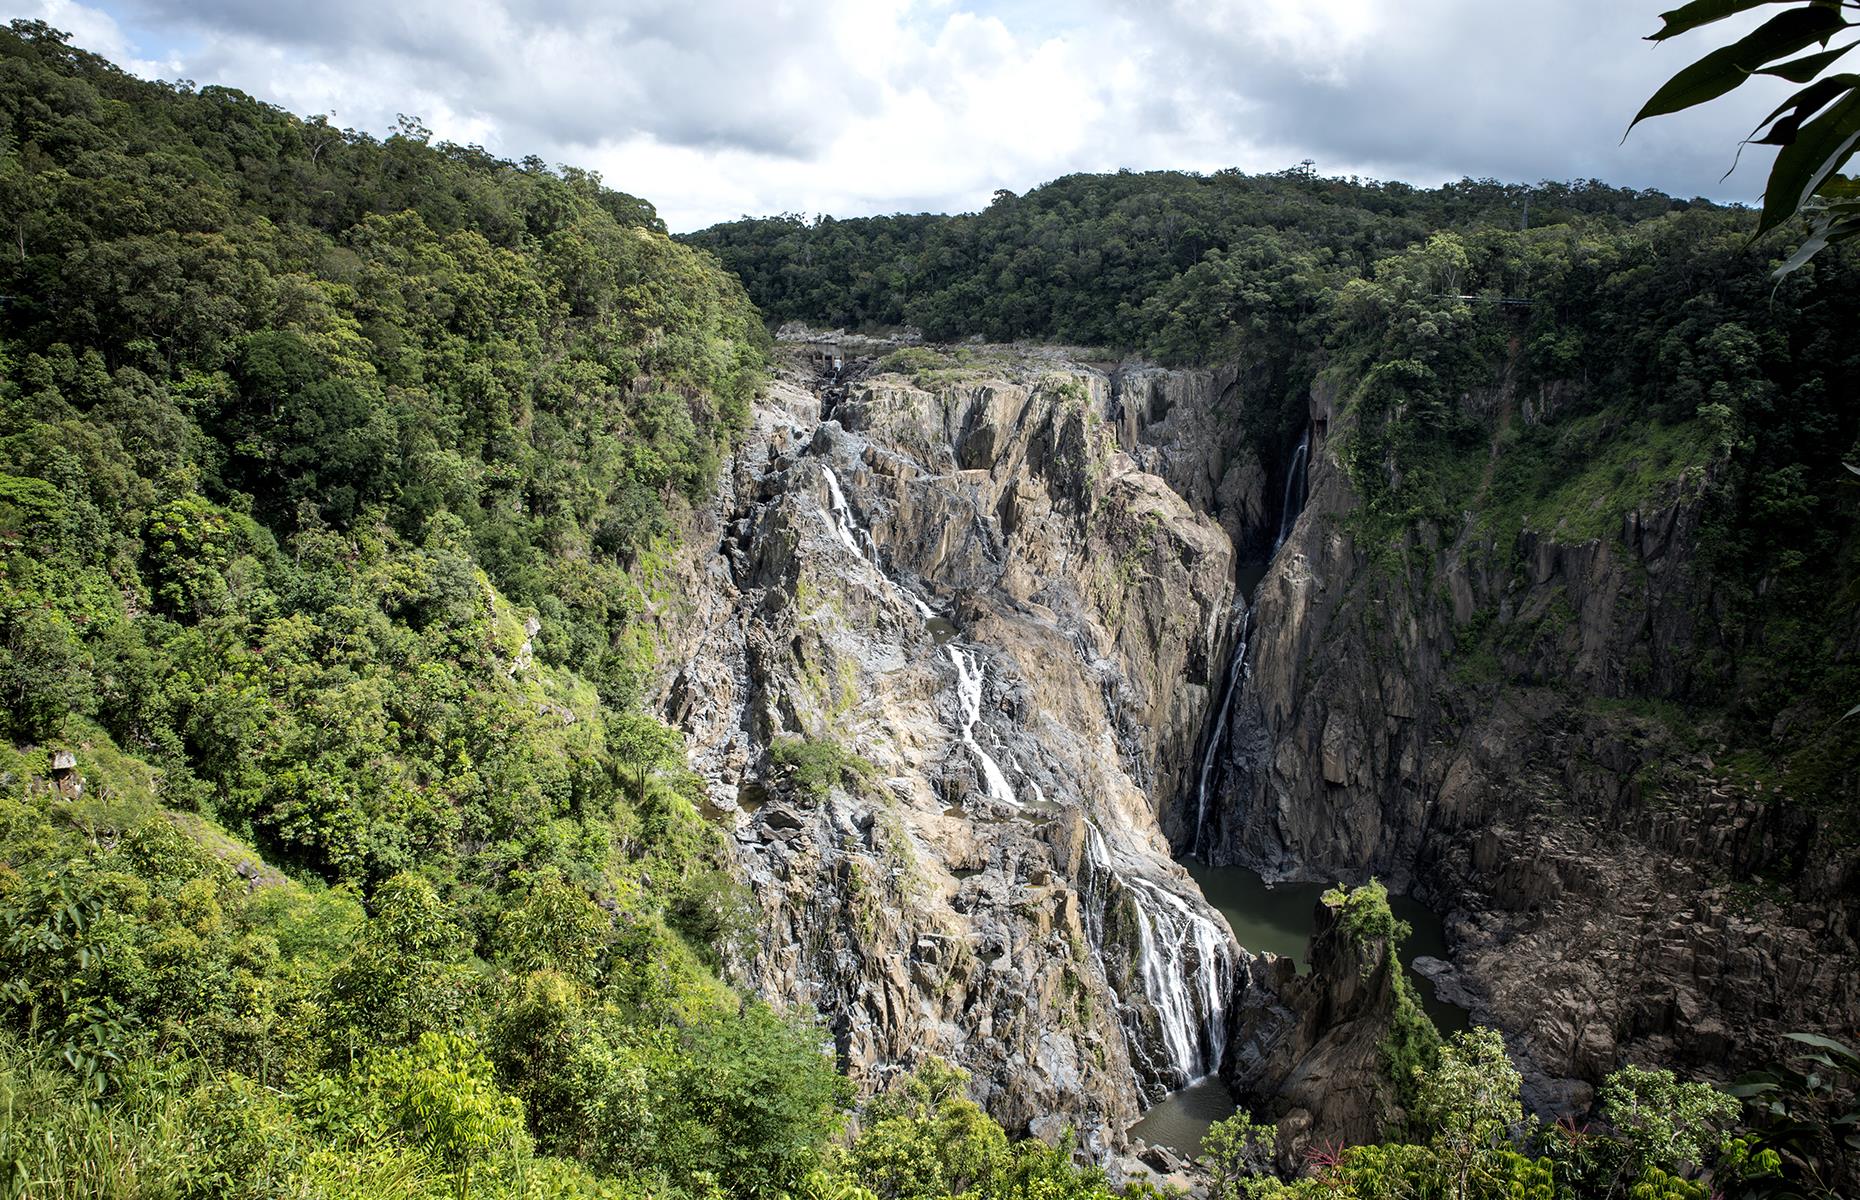 <p>Return fares start from £42 ($51) for adults and £21 ($25) for children. Many opt to take the railway to Kuranda and get the Skyrail Rainforest Cableway back, to experience the World Heritage-listed Wet Tropics of Queensland from a different angle. A <a href="https://www.skyrail.com.au/plan/skyrail-kuranda-train/">combined rail and cableway</a> ticket costs £65 ($79) for adults and £35 ($42) for children.</p>